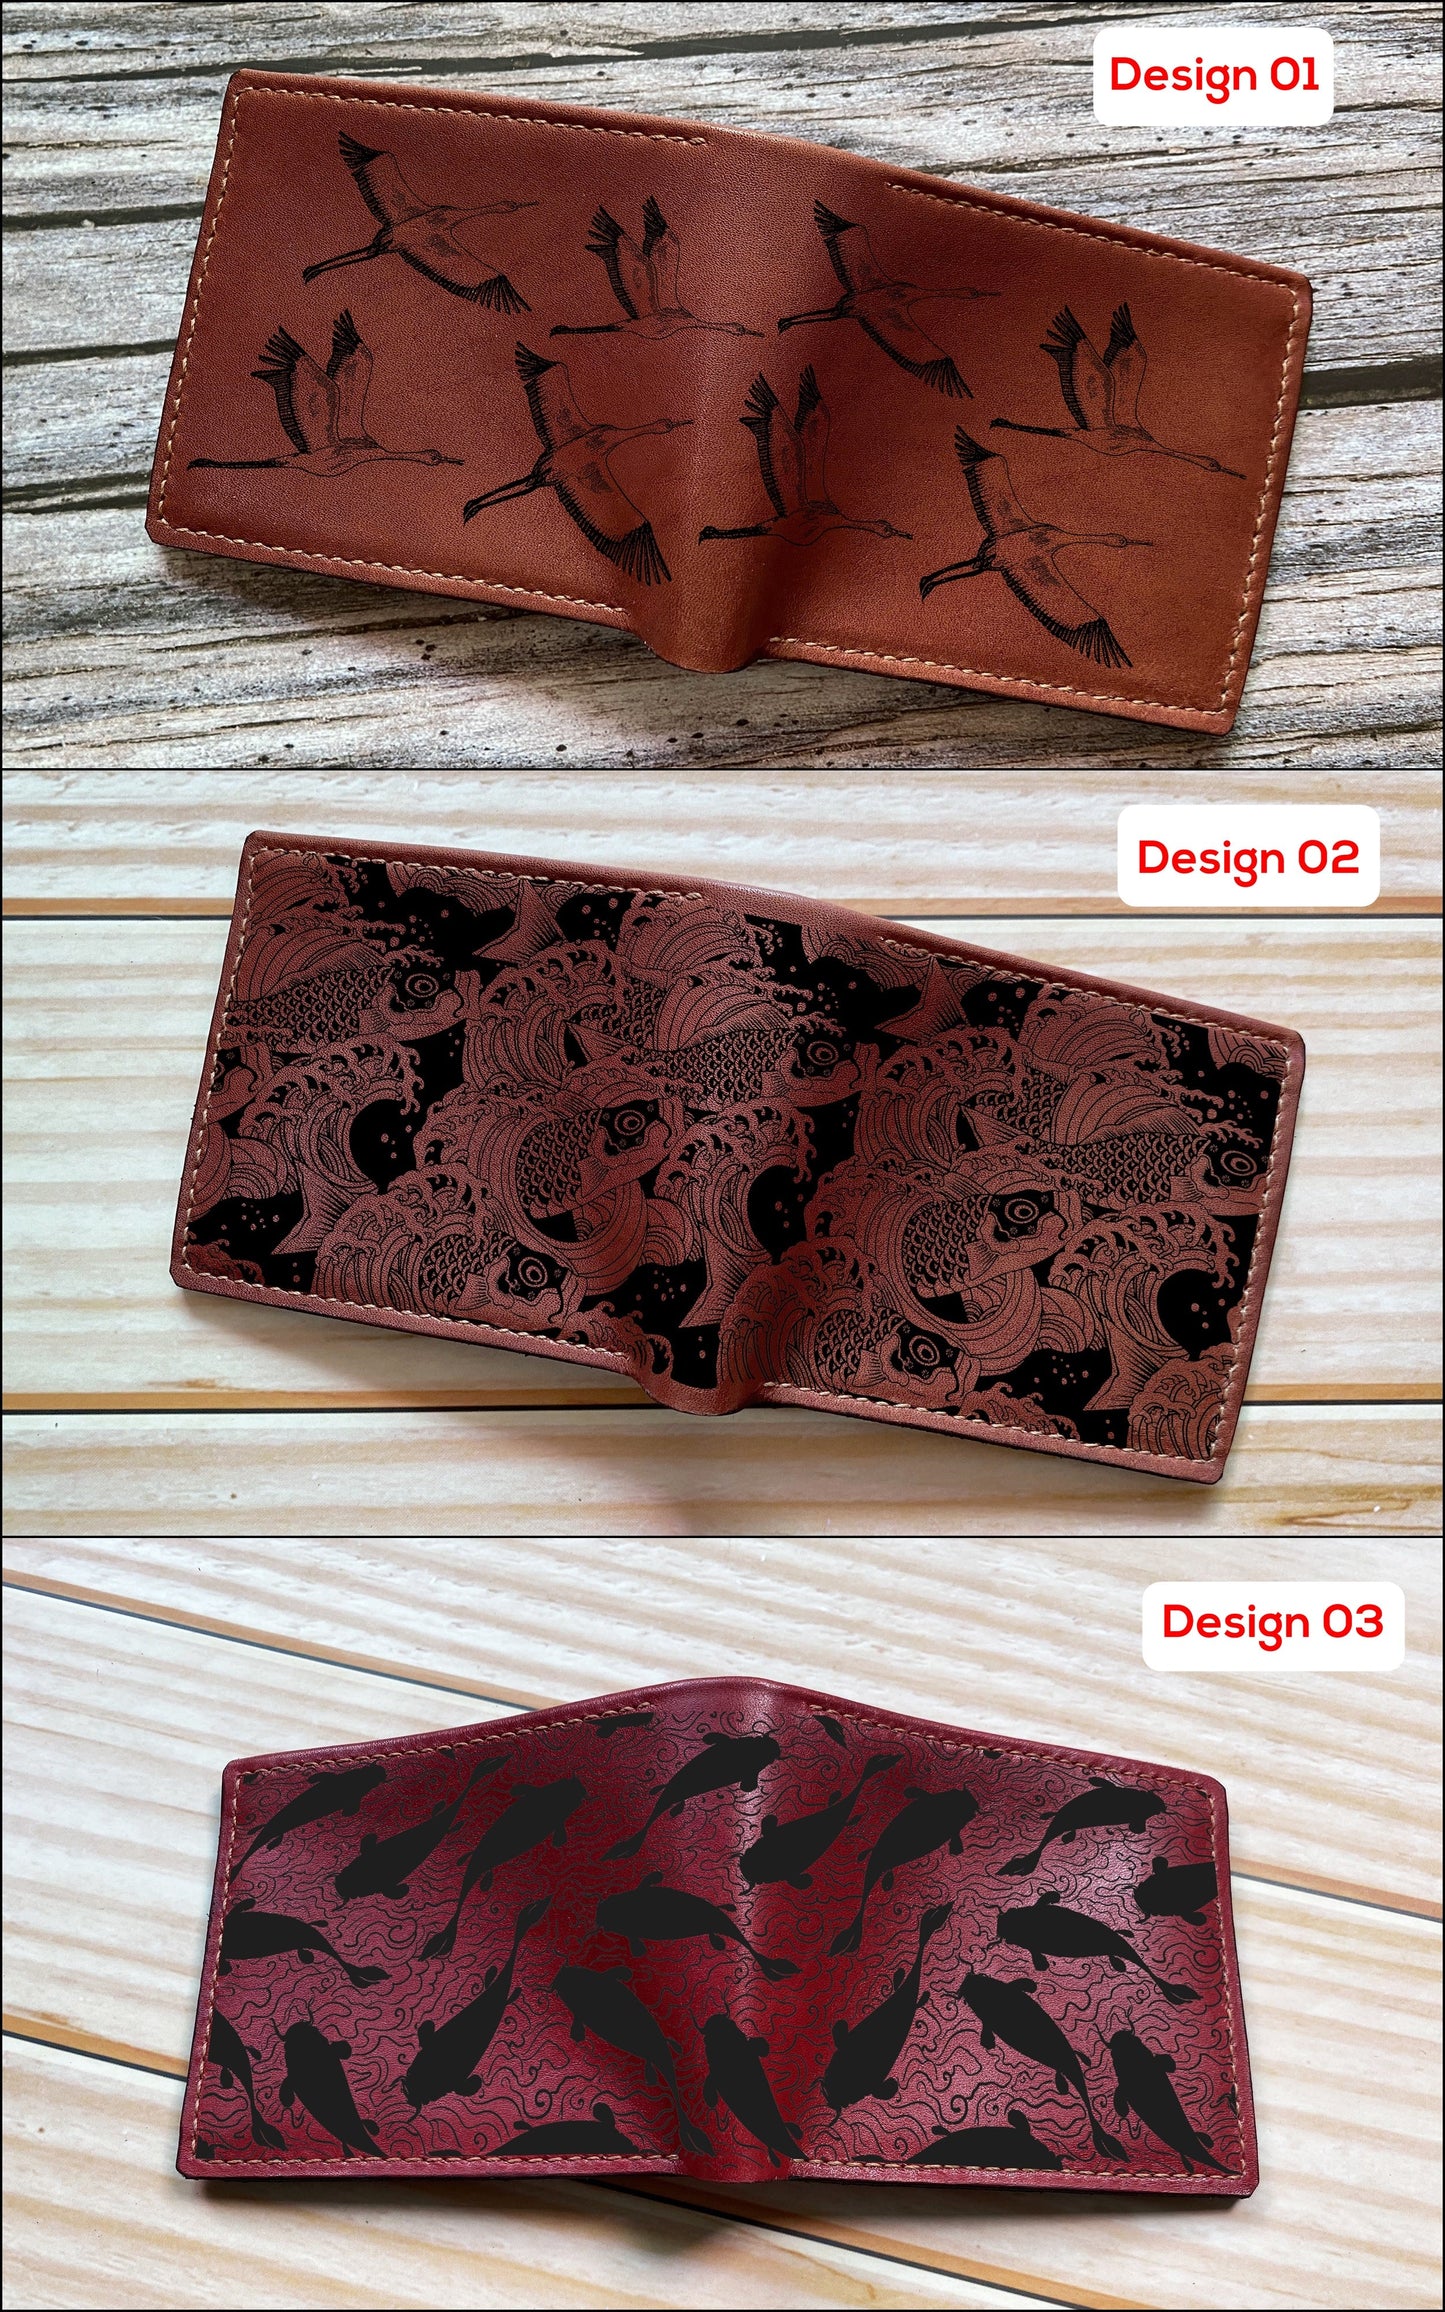 Mayan Corner - Koi fish minimalist design wallet, bifold leather wallet, japanese style leather gift for dad, husband, brother